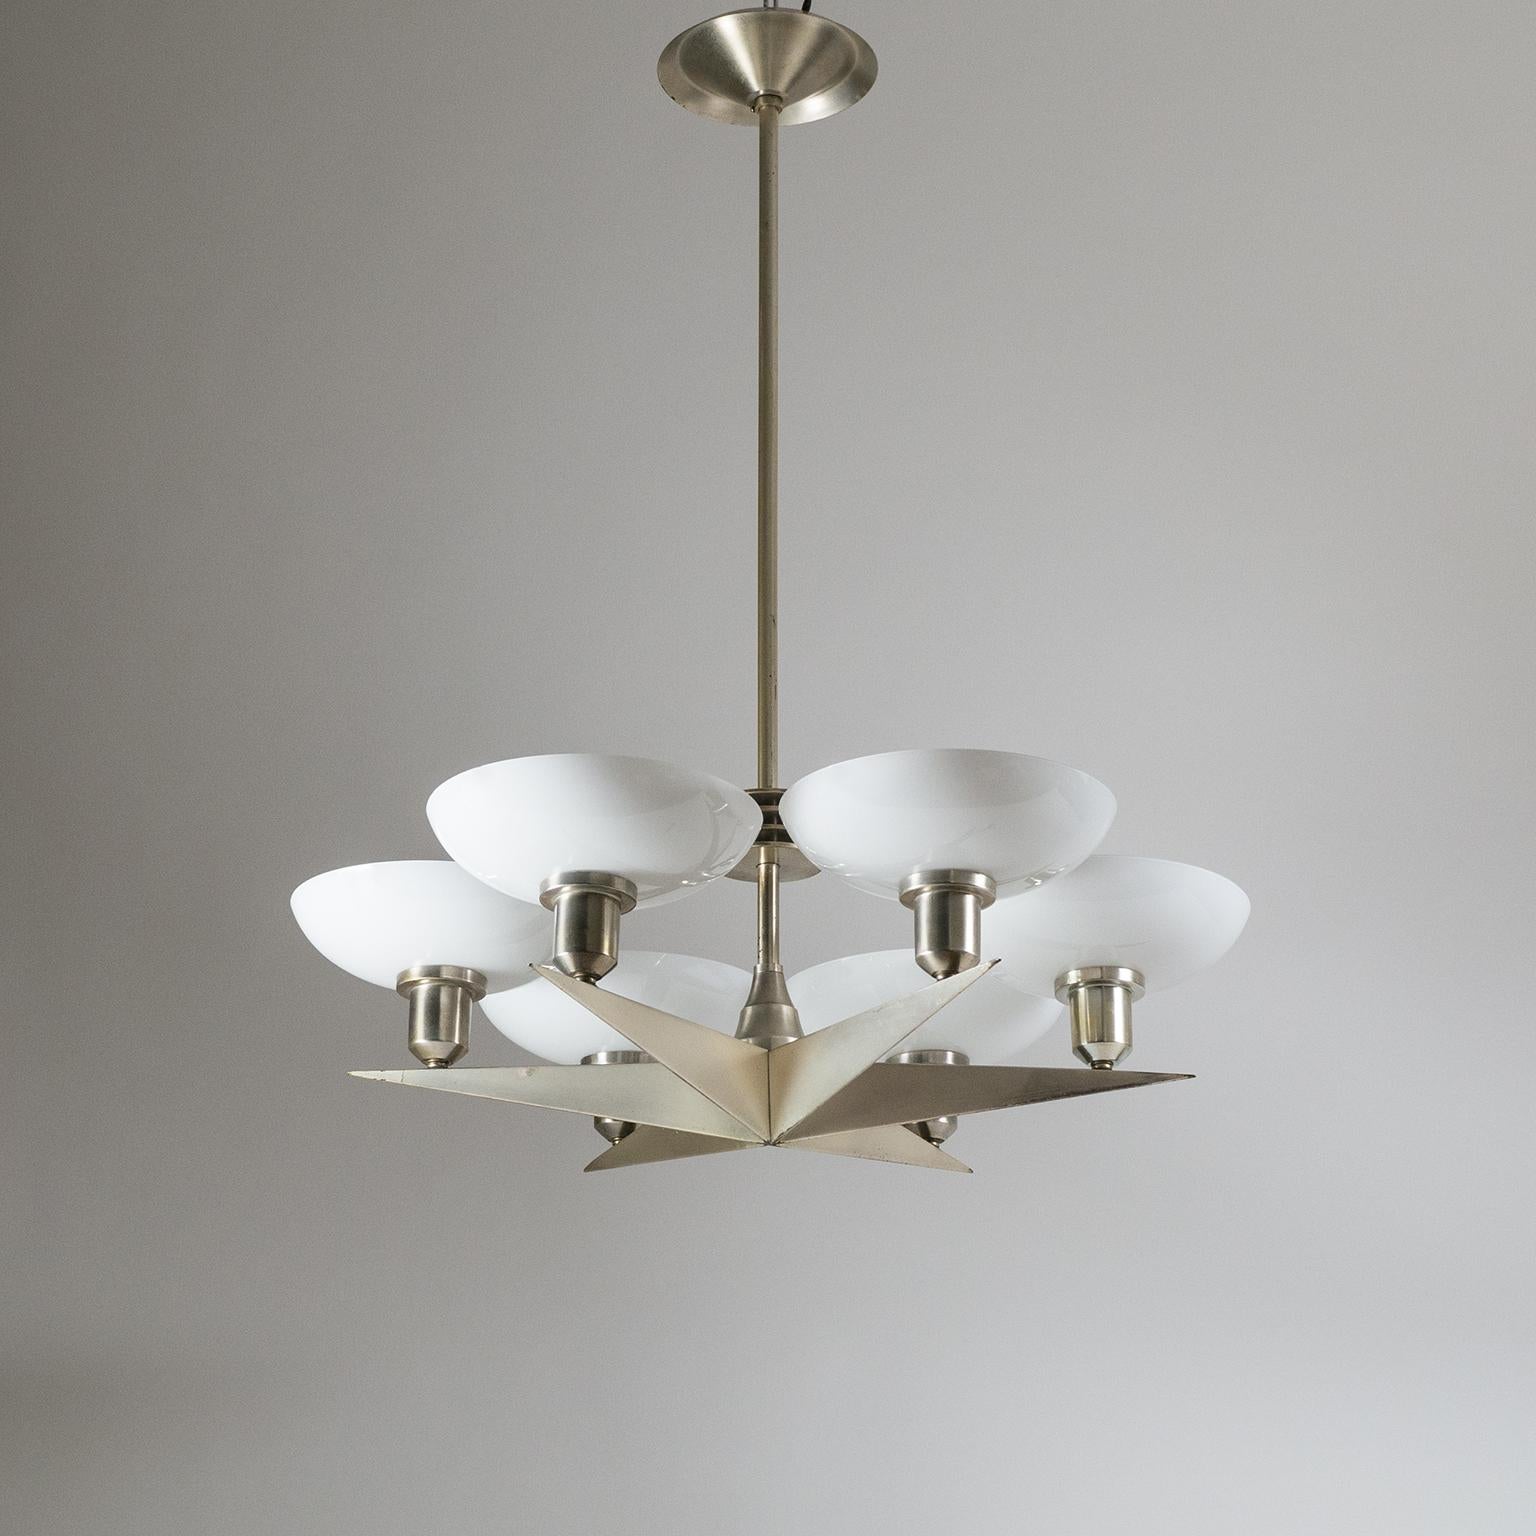 Brilliant Art Deco chandelier from the 1920s. A rare finely crafted star shaped body with six arms, each adorned with a deep bowl-shaped glass diffuser. The 